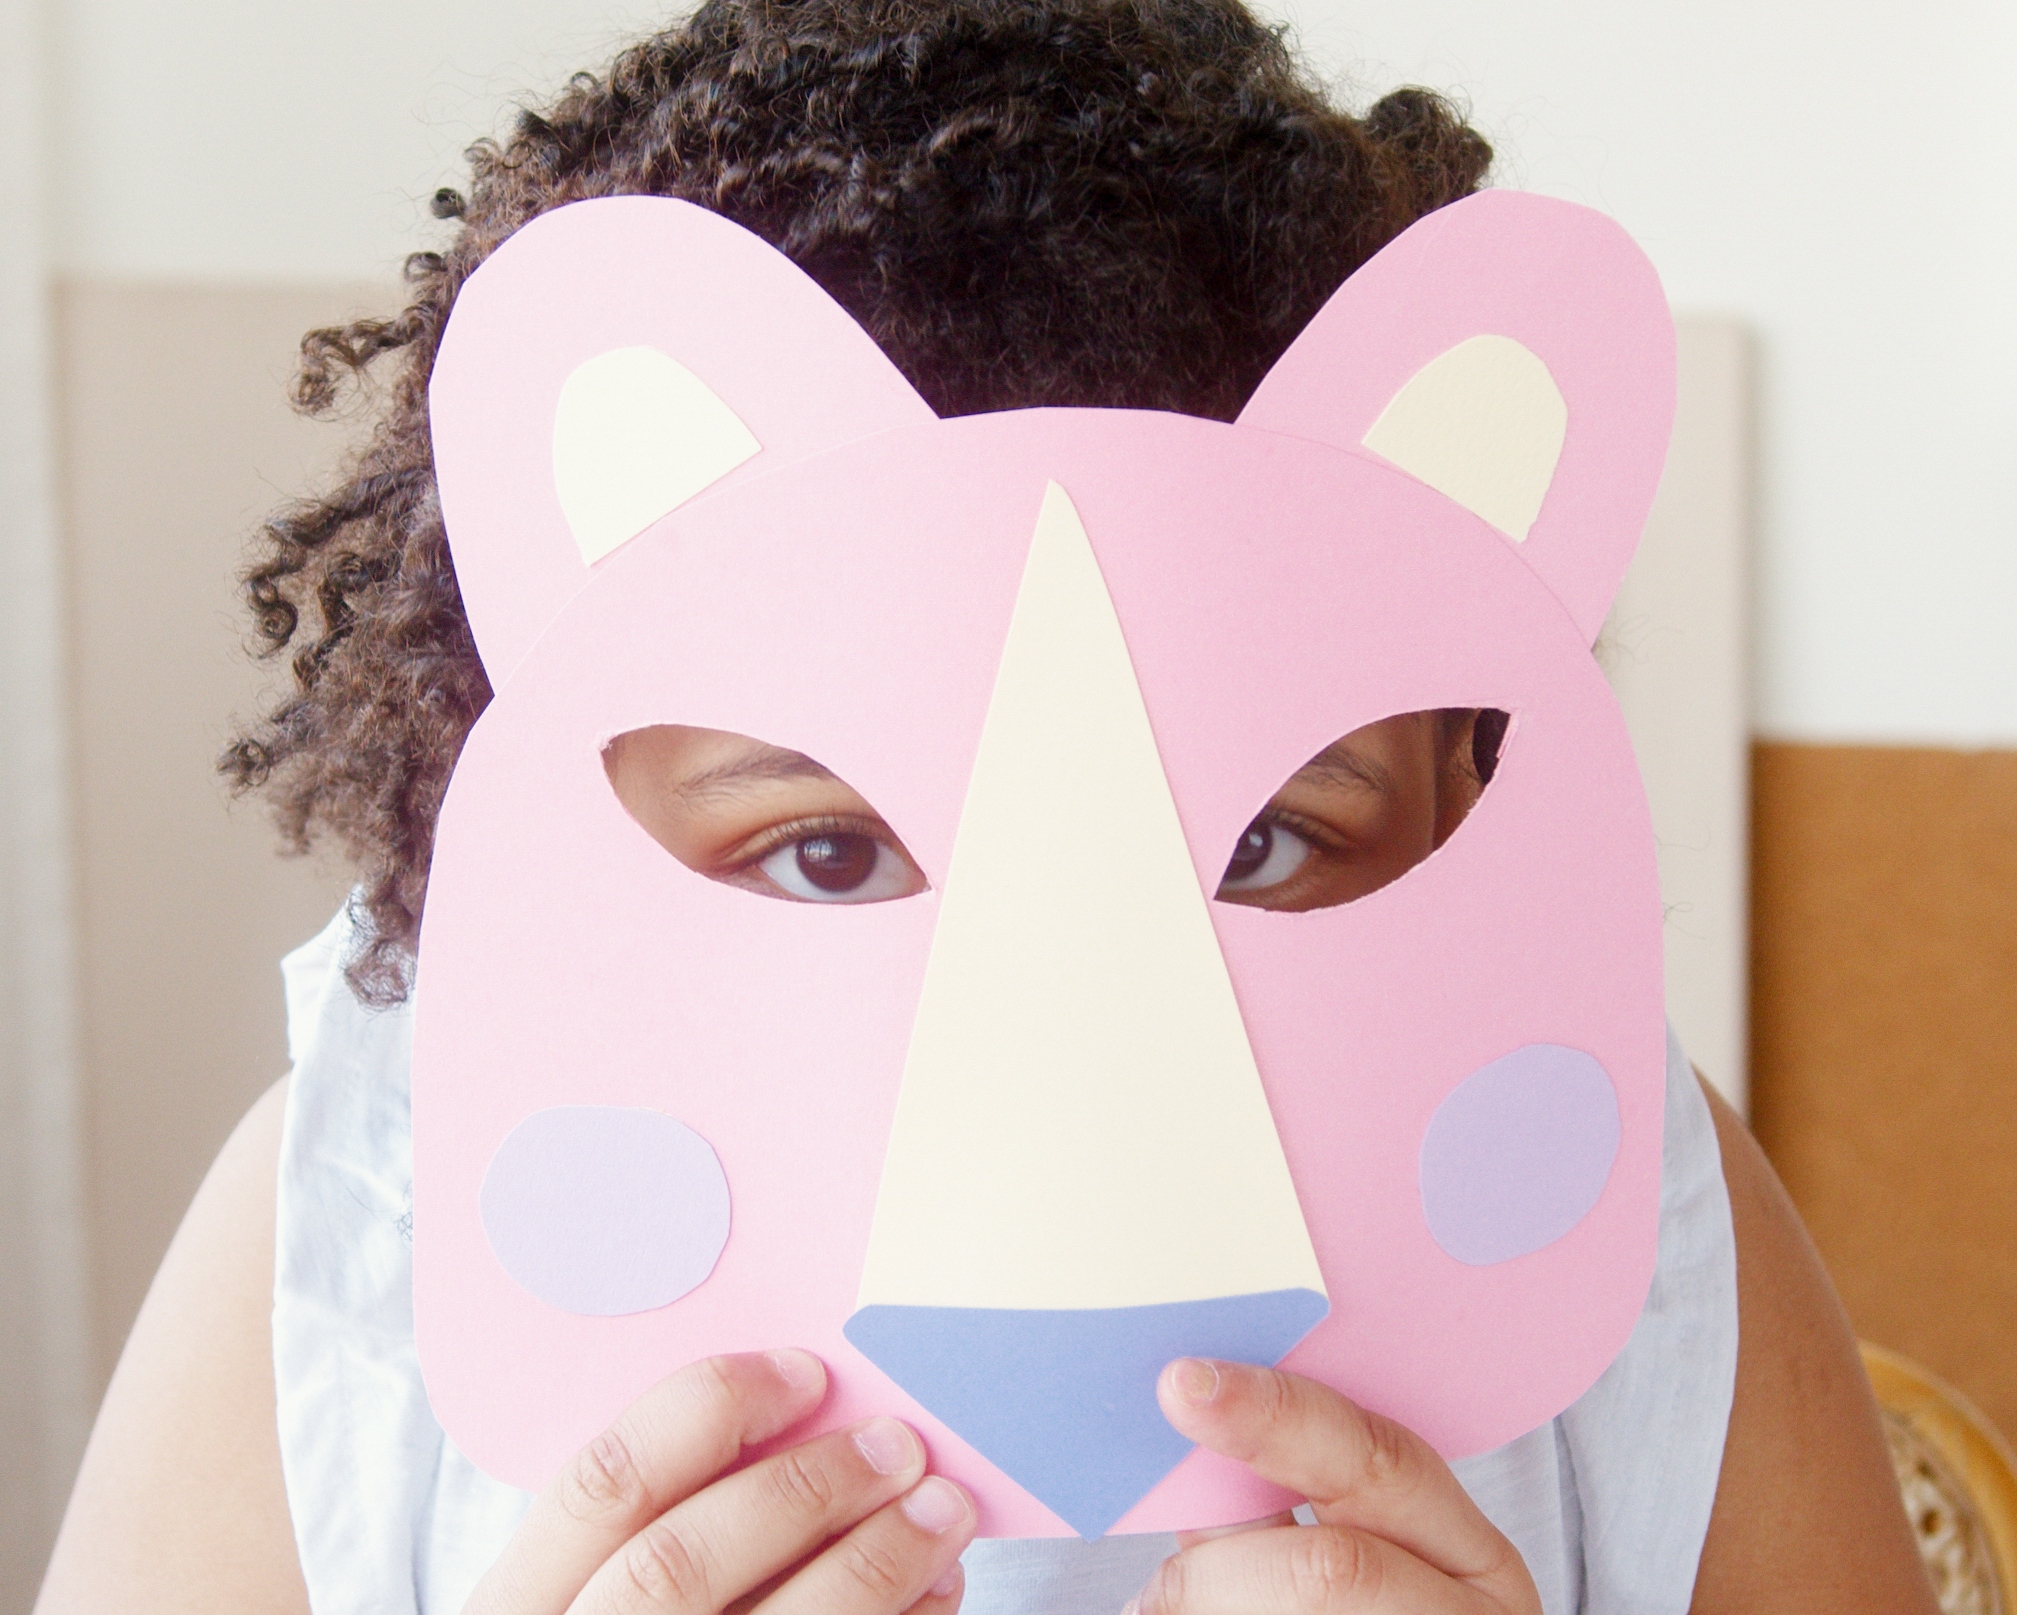 Cool DIY Projects: 10 Fun Craft Ideas for Kids - Craft projects for every  fan!